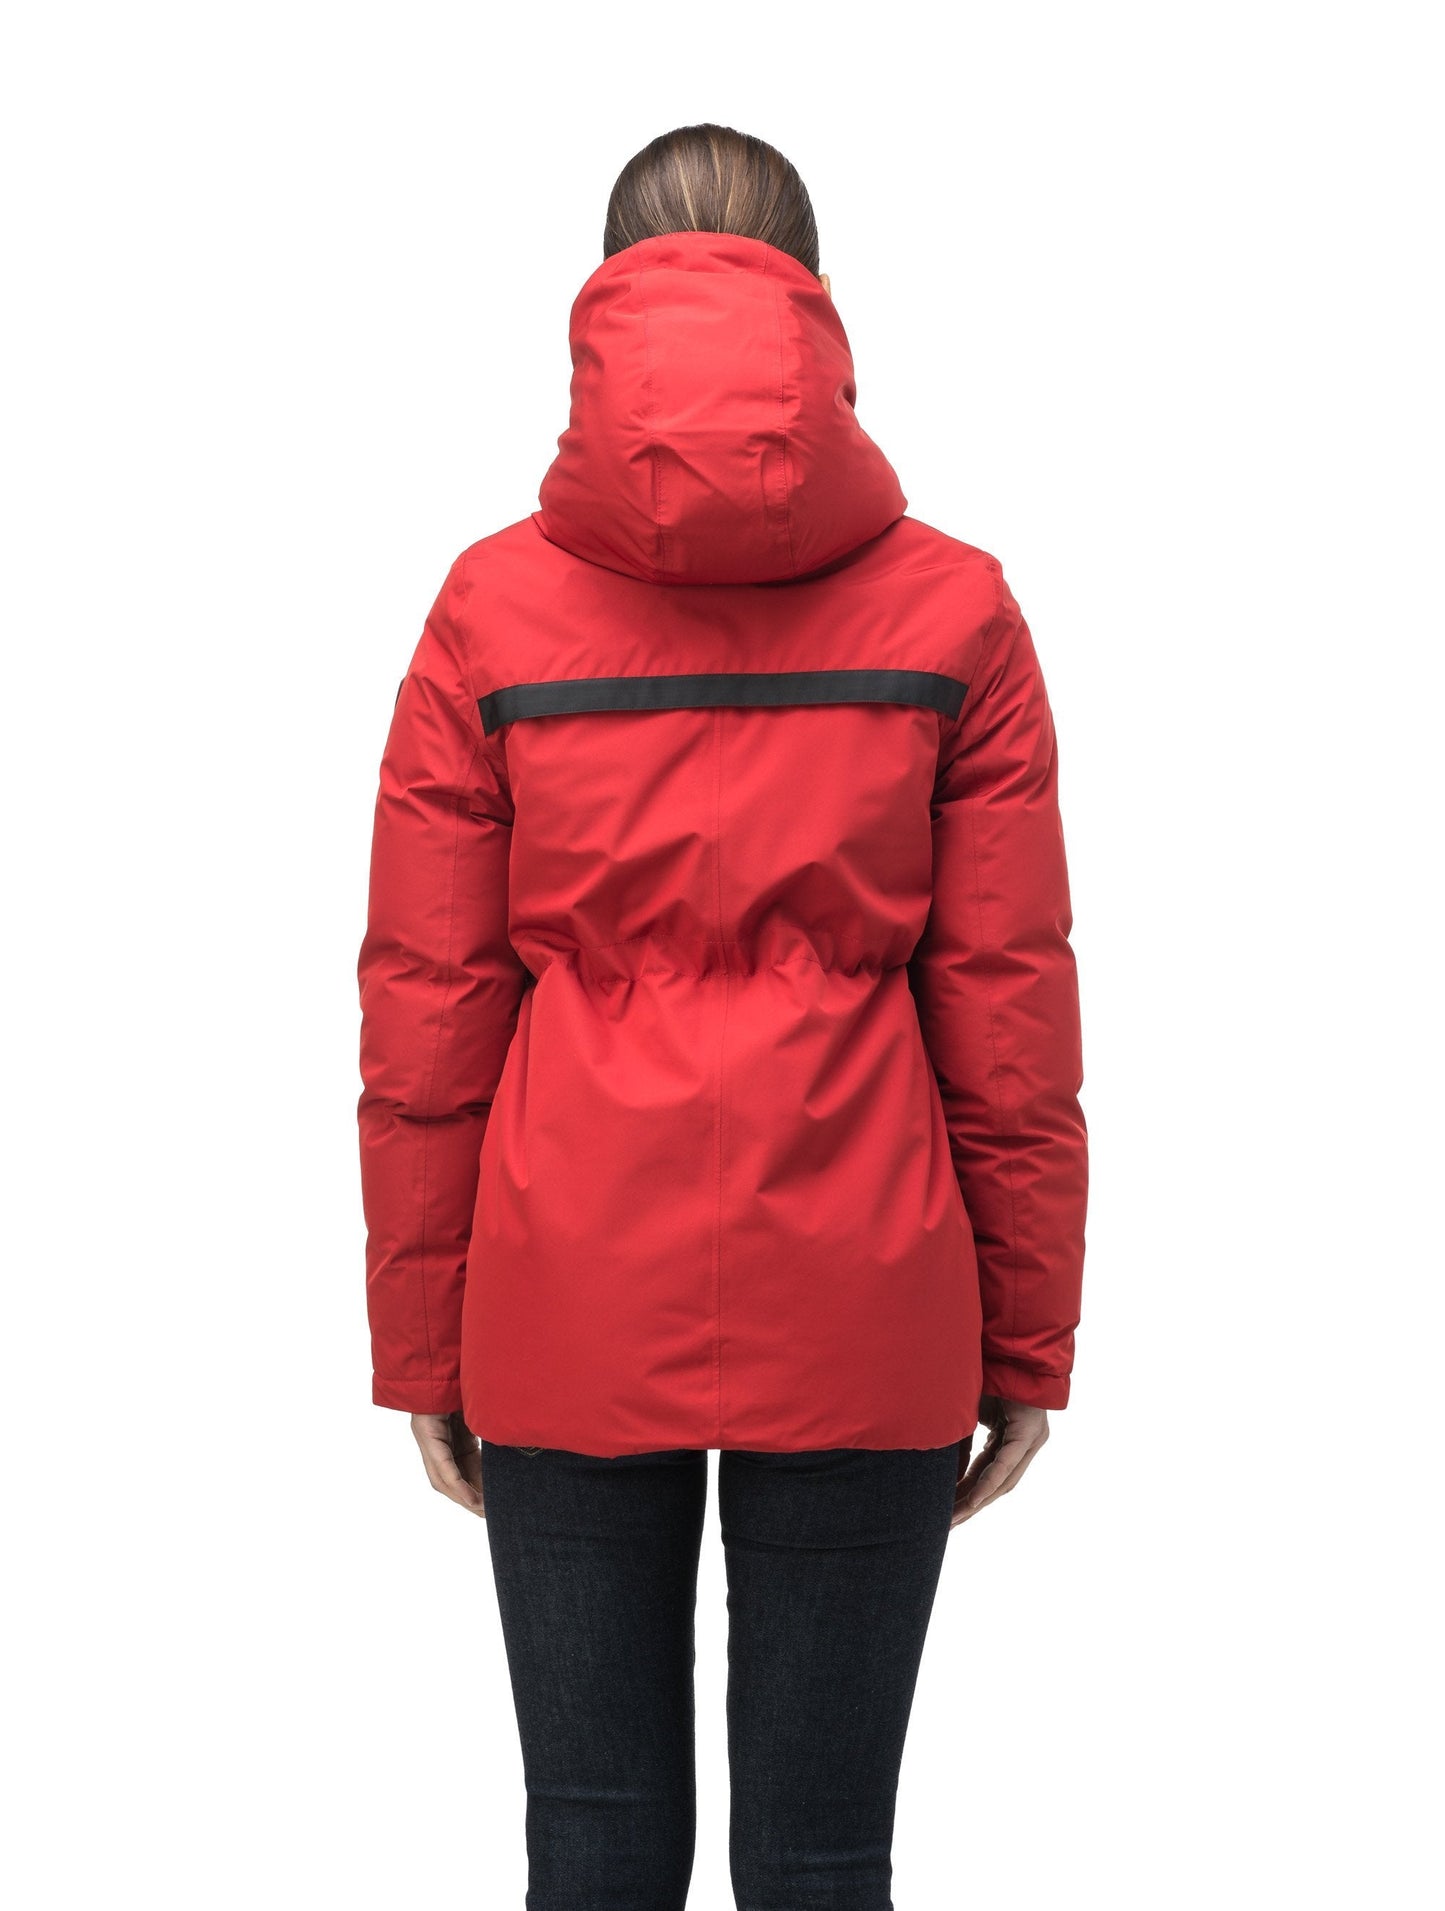 Hip length, reversible women's down filled jacket with waterproof exposed zipper in Vermillion